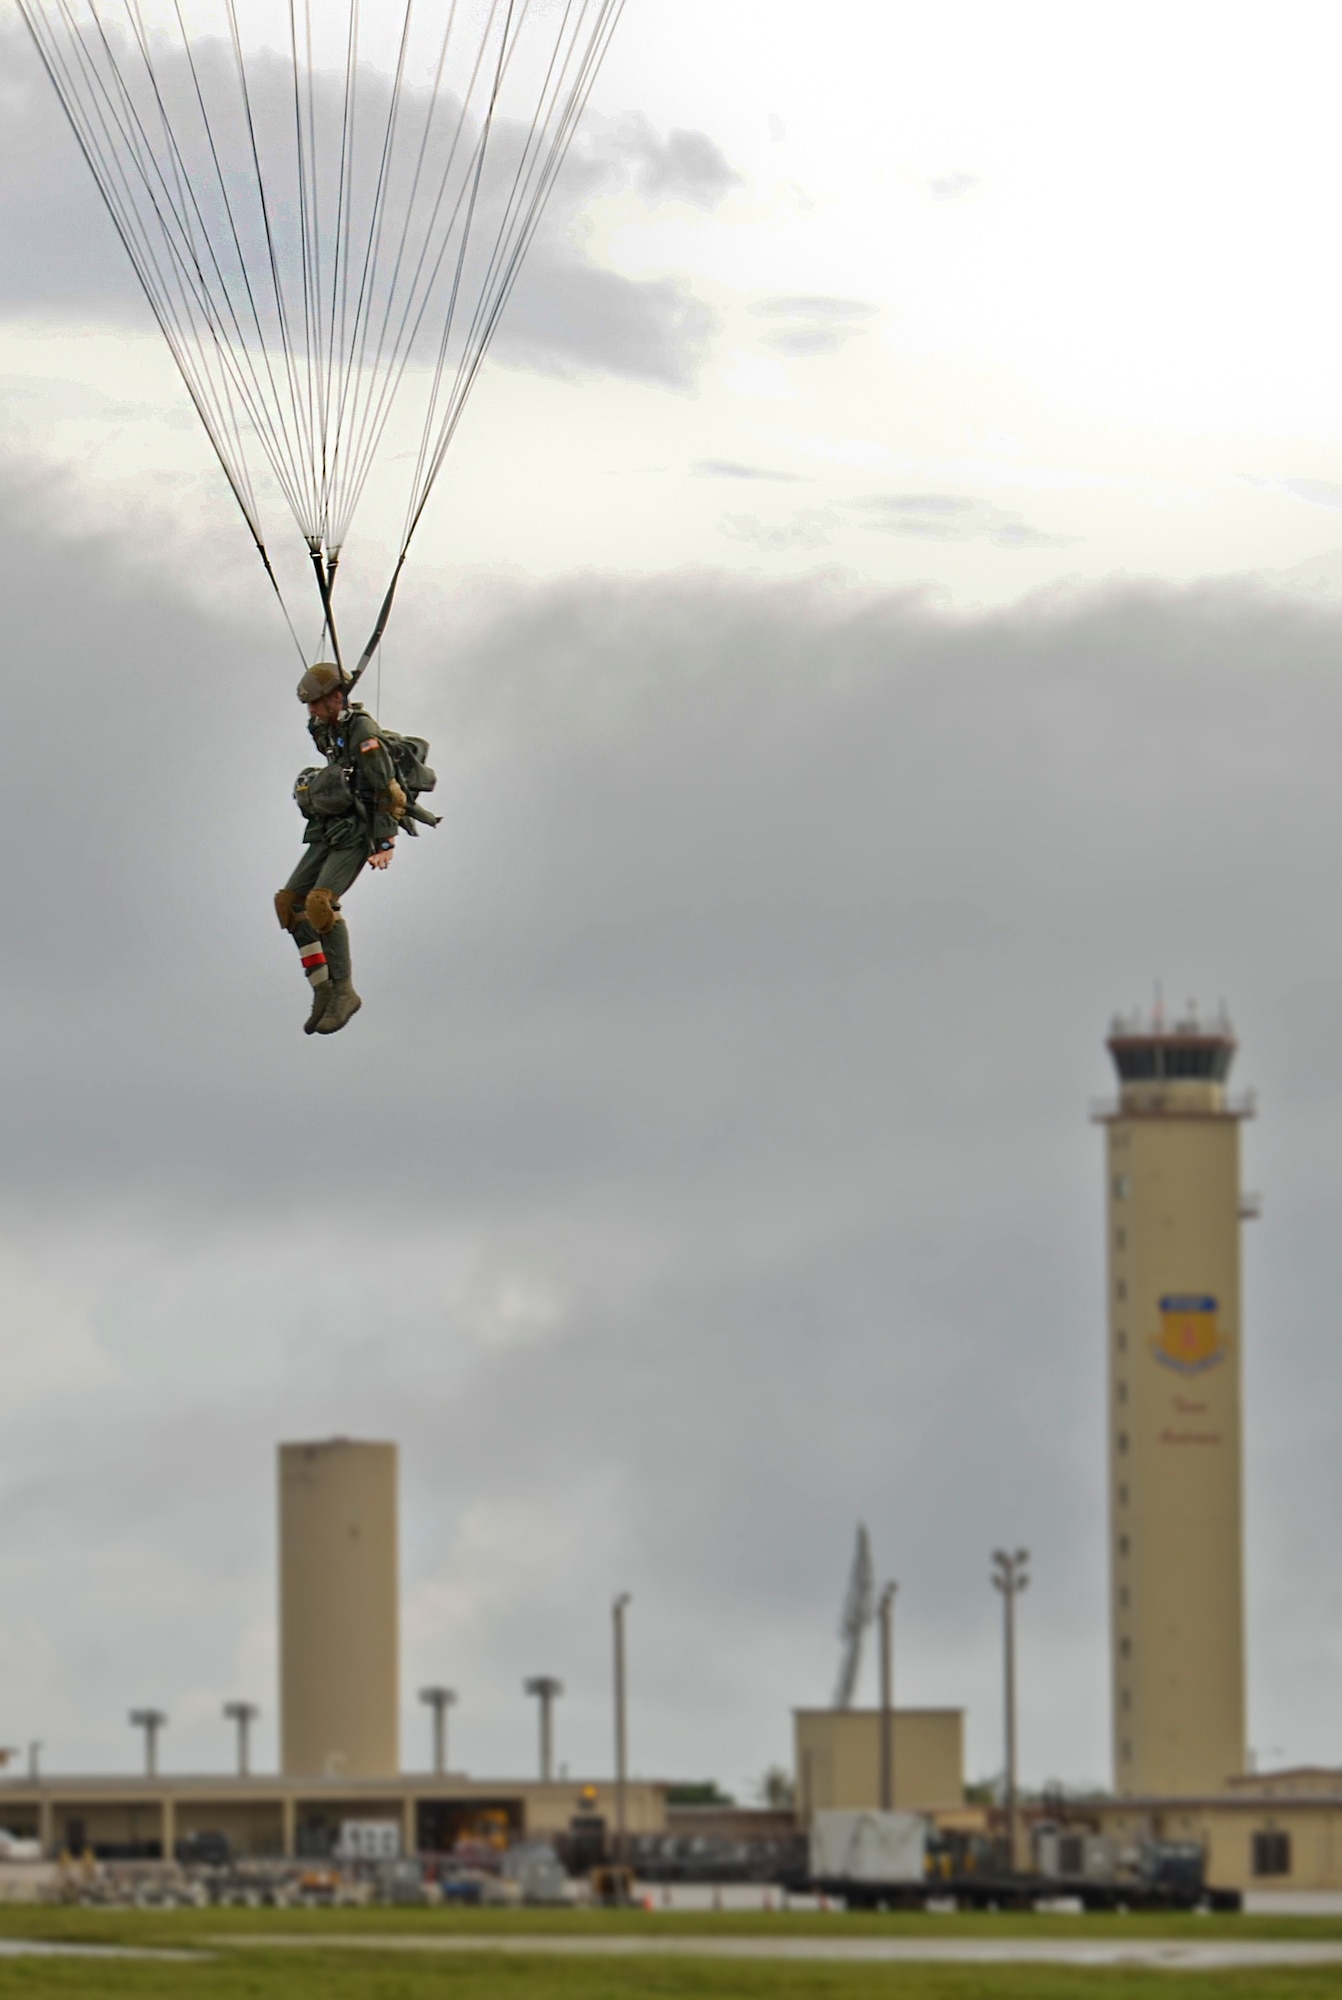 Staff Sgt. Jacob Thompson, 736th Security Forces Squadron fire team leader and jumpmaster, makes his way to the ground after a static line jump from a C-130 Hercules over the Andersen Air Force Base, Guam, flightline Aug. 21, 2013. As the integrated force protection element of the 36th Contingency Response Group, members of the 736th SFS provide a quick-response airborne capability that serves as an advance echelon team for contingency and humanitarian missions all over the Asia-Pacific region. (U.S. Air Force photo by Airman 1st Class Marianique Santos/Released)